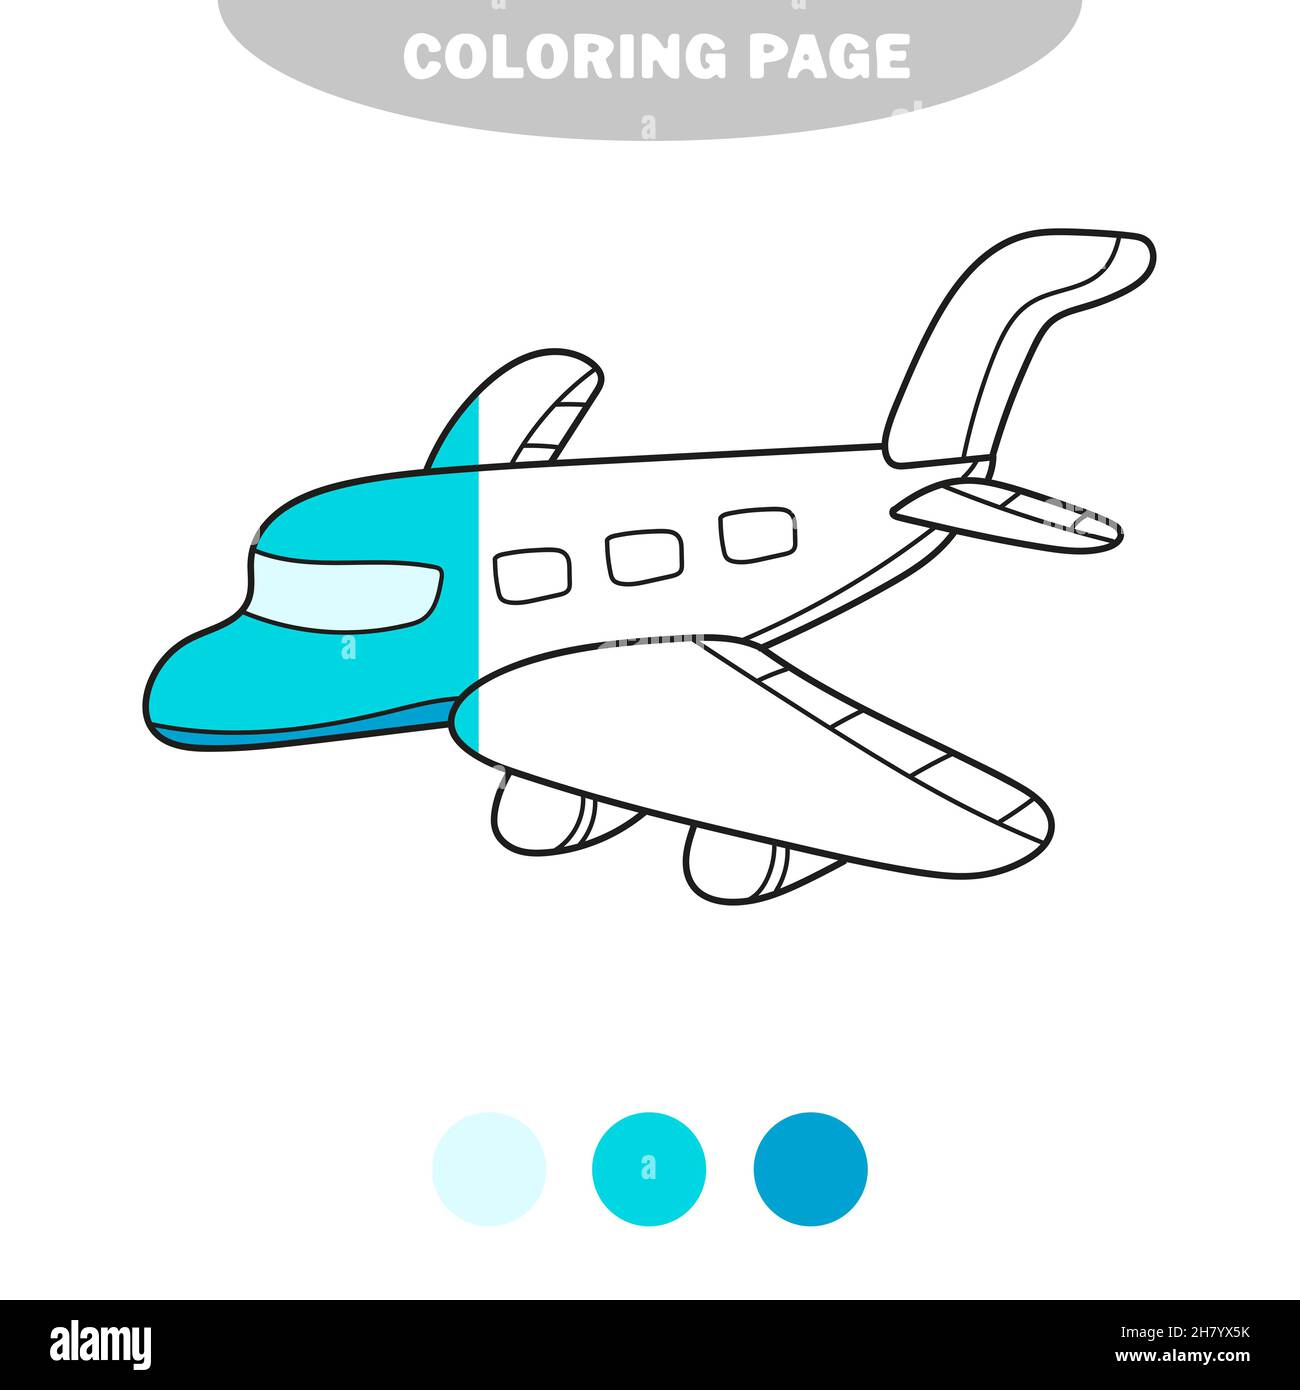 Simple coloring page. Vector black and white plane isolated on ...